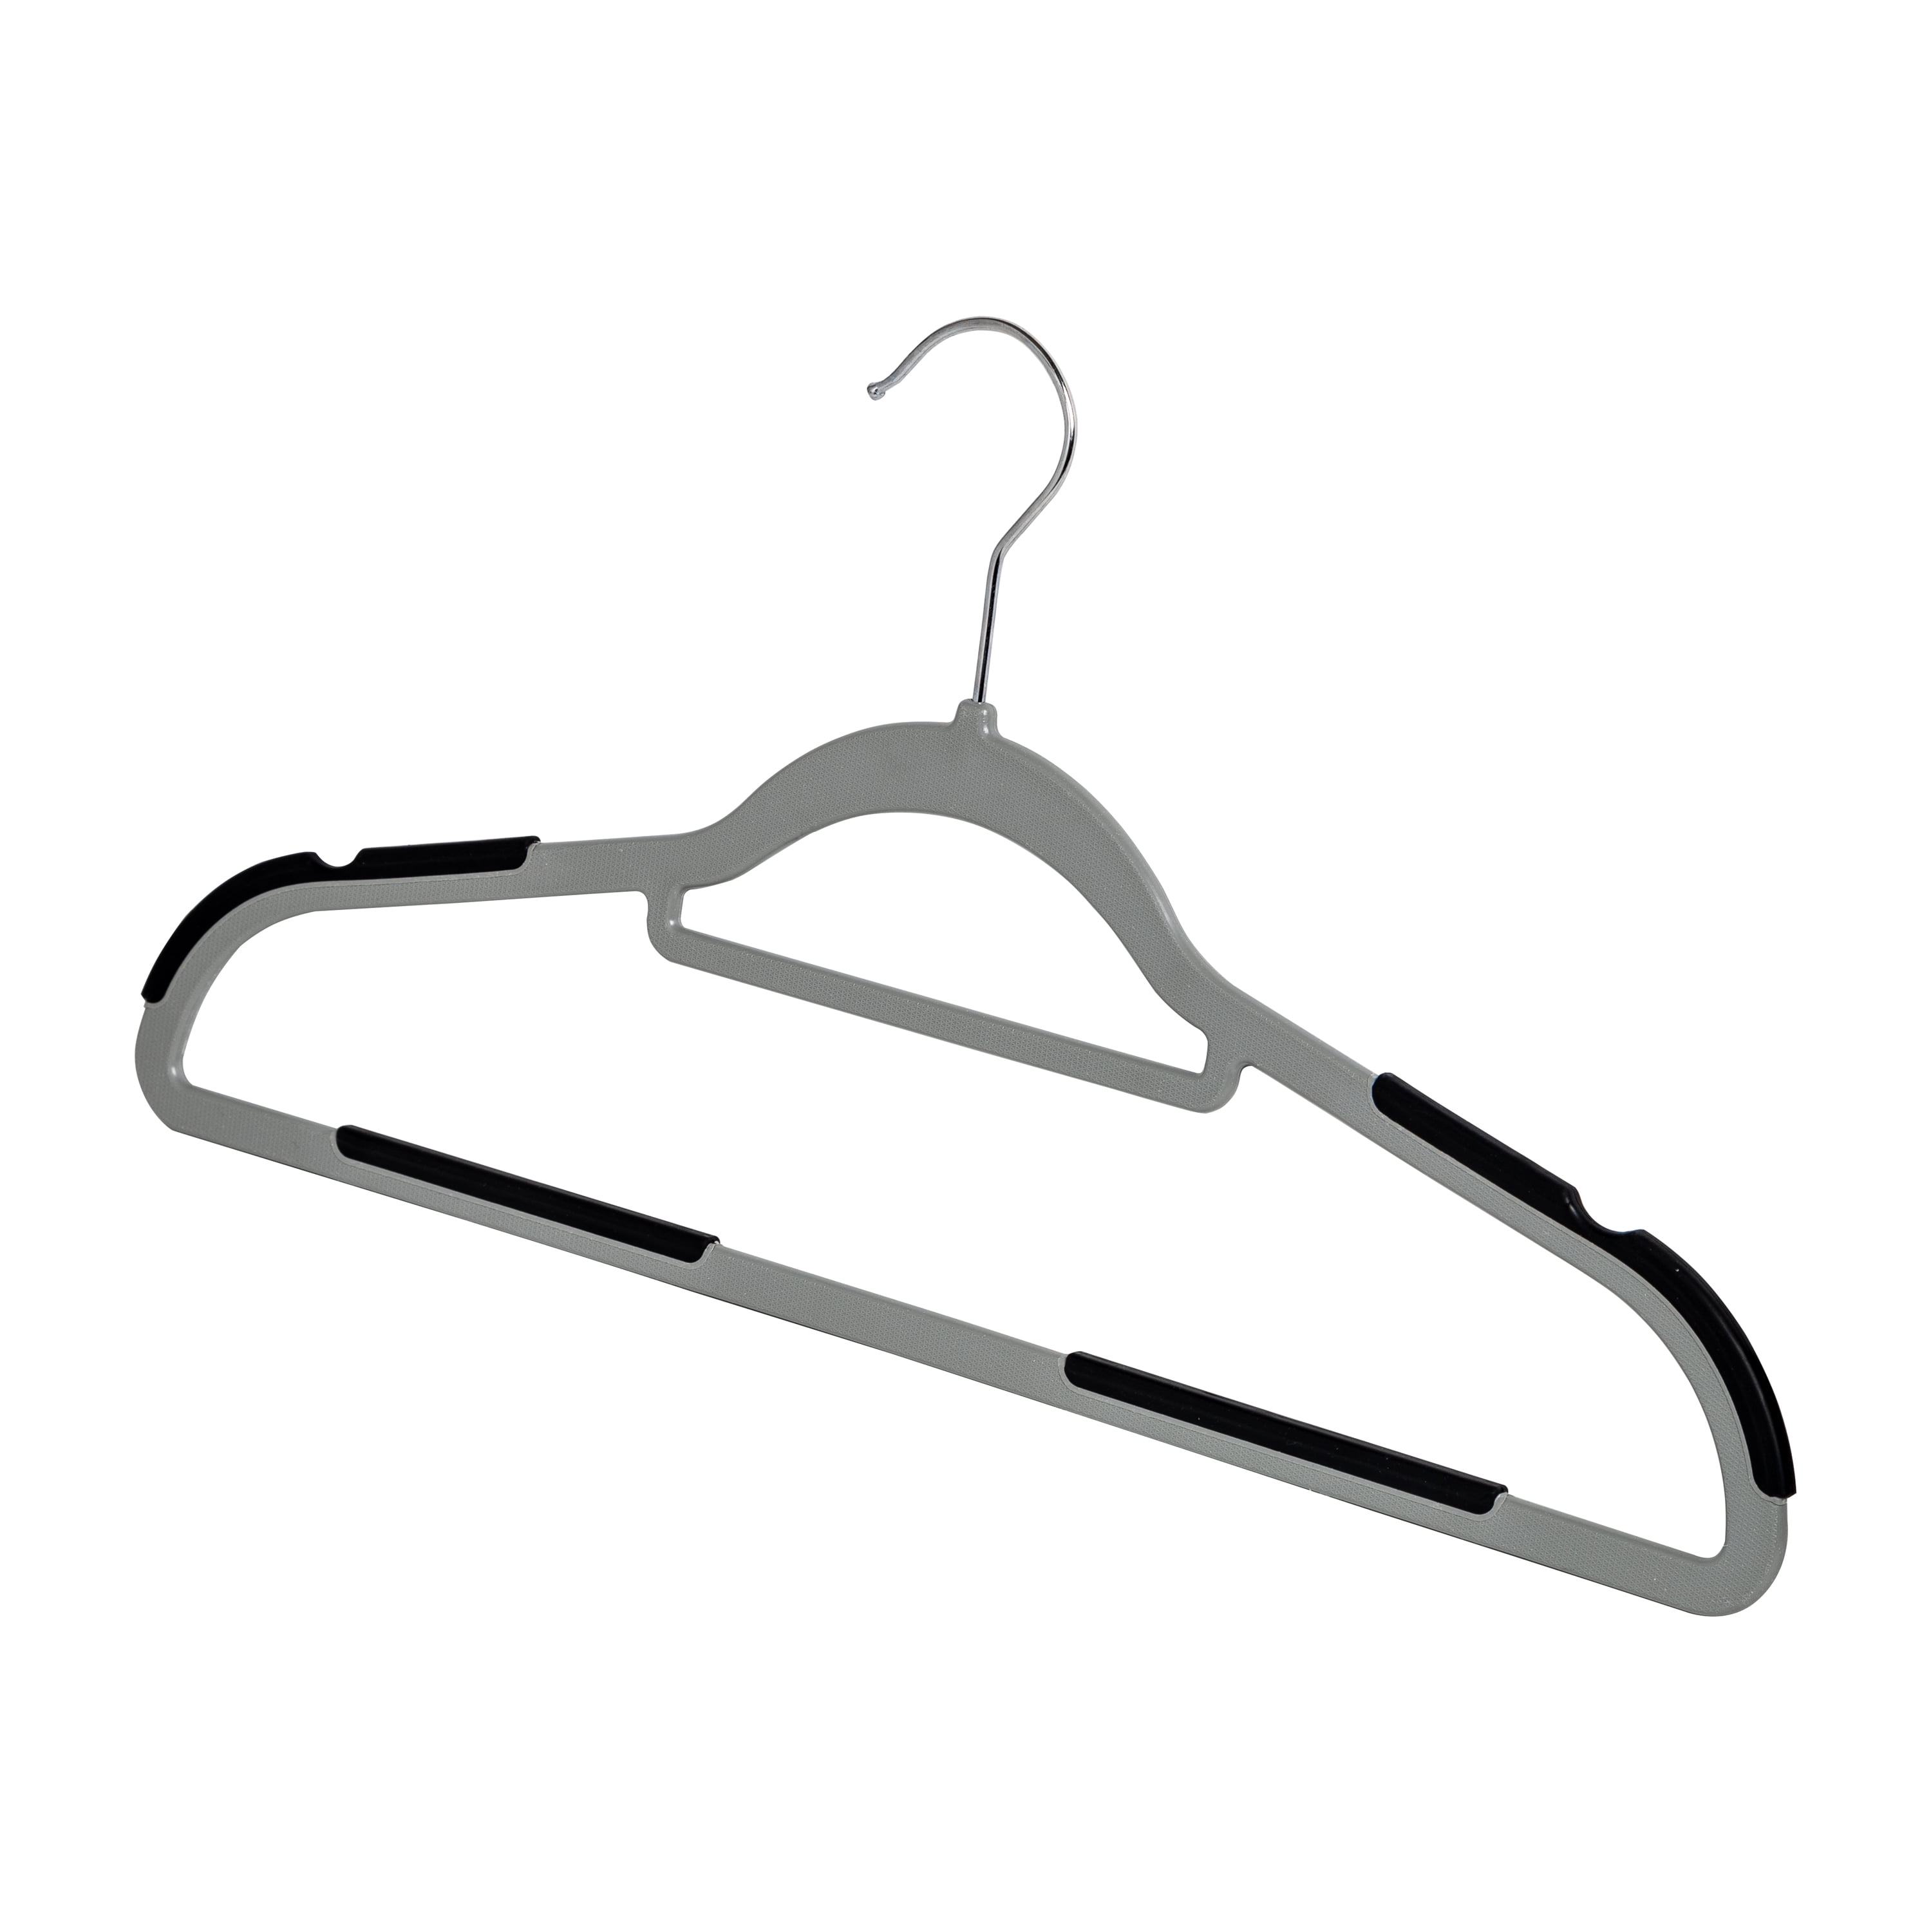  Tinfol Plastic Hangers, 30 Pack Slim Clothes Hangers Space  Saving, Non Slip Grey Rubber Strip with 360° Swivel Hook, Strong & Heavy  Duty Dry Wet Clothes Hangers for Shirts Pants Underwear